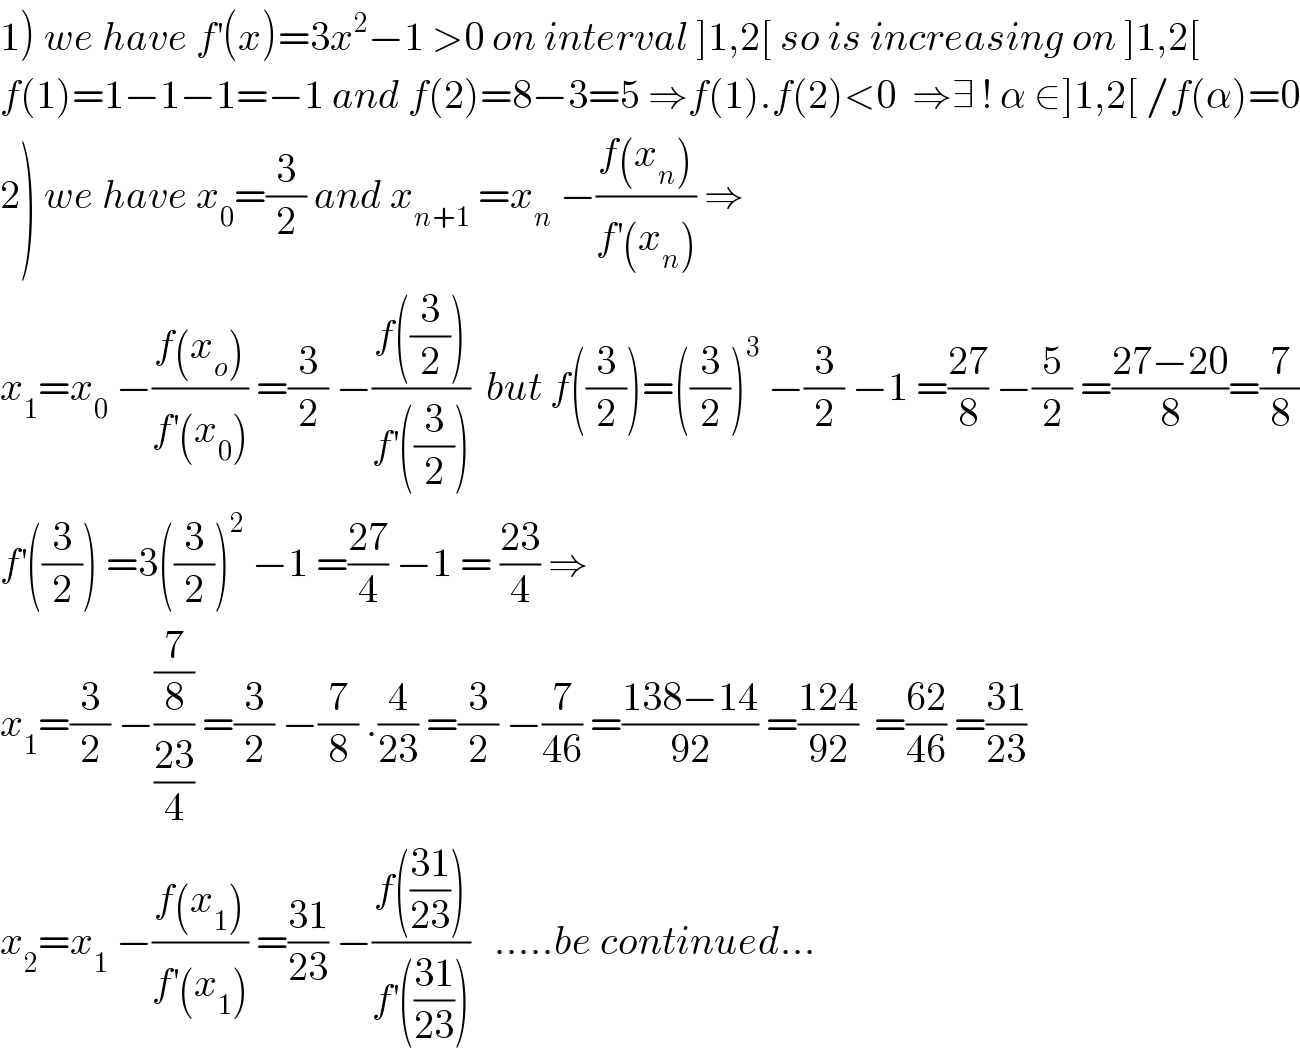 1) we have f^′ (x)=3x^2 −1 >0 on interval ]1,2[ so is increasing on ]1,2[  f(1)=1−1−1=−1 and f(2)=8−3=5 ⇒f(1).f(2)<0  ⇒∃ ! α ∈]1,2[ /f(α)=0  2) we have x_0 =(3/2) and x_(n+1)  =x_n  −((f(x_n ))/(f^′ (x_n ))) ⇒  x_1 =x_0  −((f(x_o ))/(f^′ (x_0 ))) =(3/2) −((f((3/2)))/(f^′ ((3/2))))  but f((3/2))=((3/2))^3  −(3/2) −1 =((27)/8) −(5/2) =((27−20)/8)=(7/8)  f^′ ((3/2)) =3((3/2))^2  −1 =((27)/4) −1 = ((23)/4) ⇒  x_1 =(3/2) −((7/8)/((23)/4)) =(3/2) −(7/8) .(4/(23)) =(3/2) −(7/(46)) =((138−14)/(92)) =((124)/(92))  =((62)/(46)) =((31)/(23))  x_2 =x_1  −((f(x_1 ))/(f^′ (x_1 ))) =((31)/(23)) −((f(((31)/(23))))/(f^′ (((31)/(23)))))   .....be continued...  